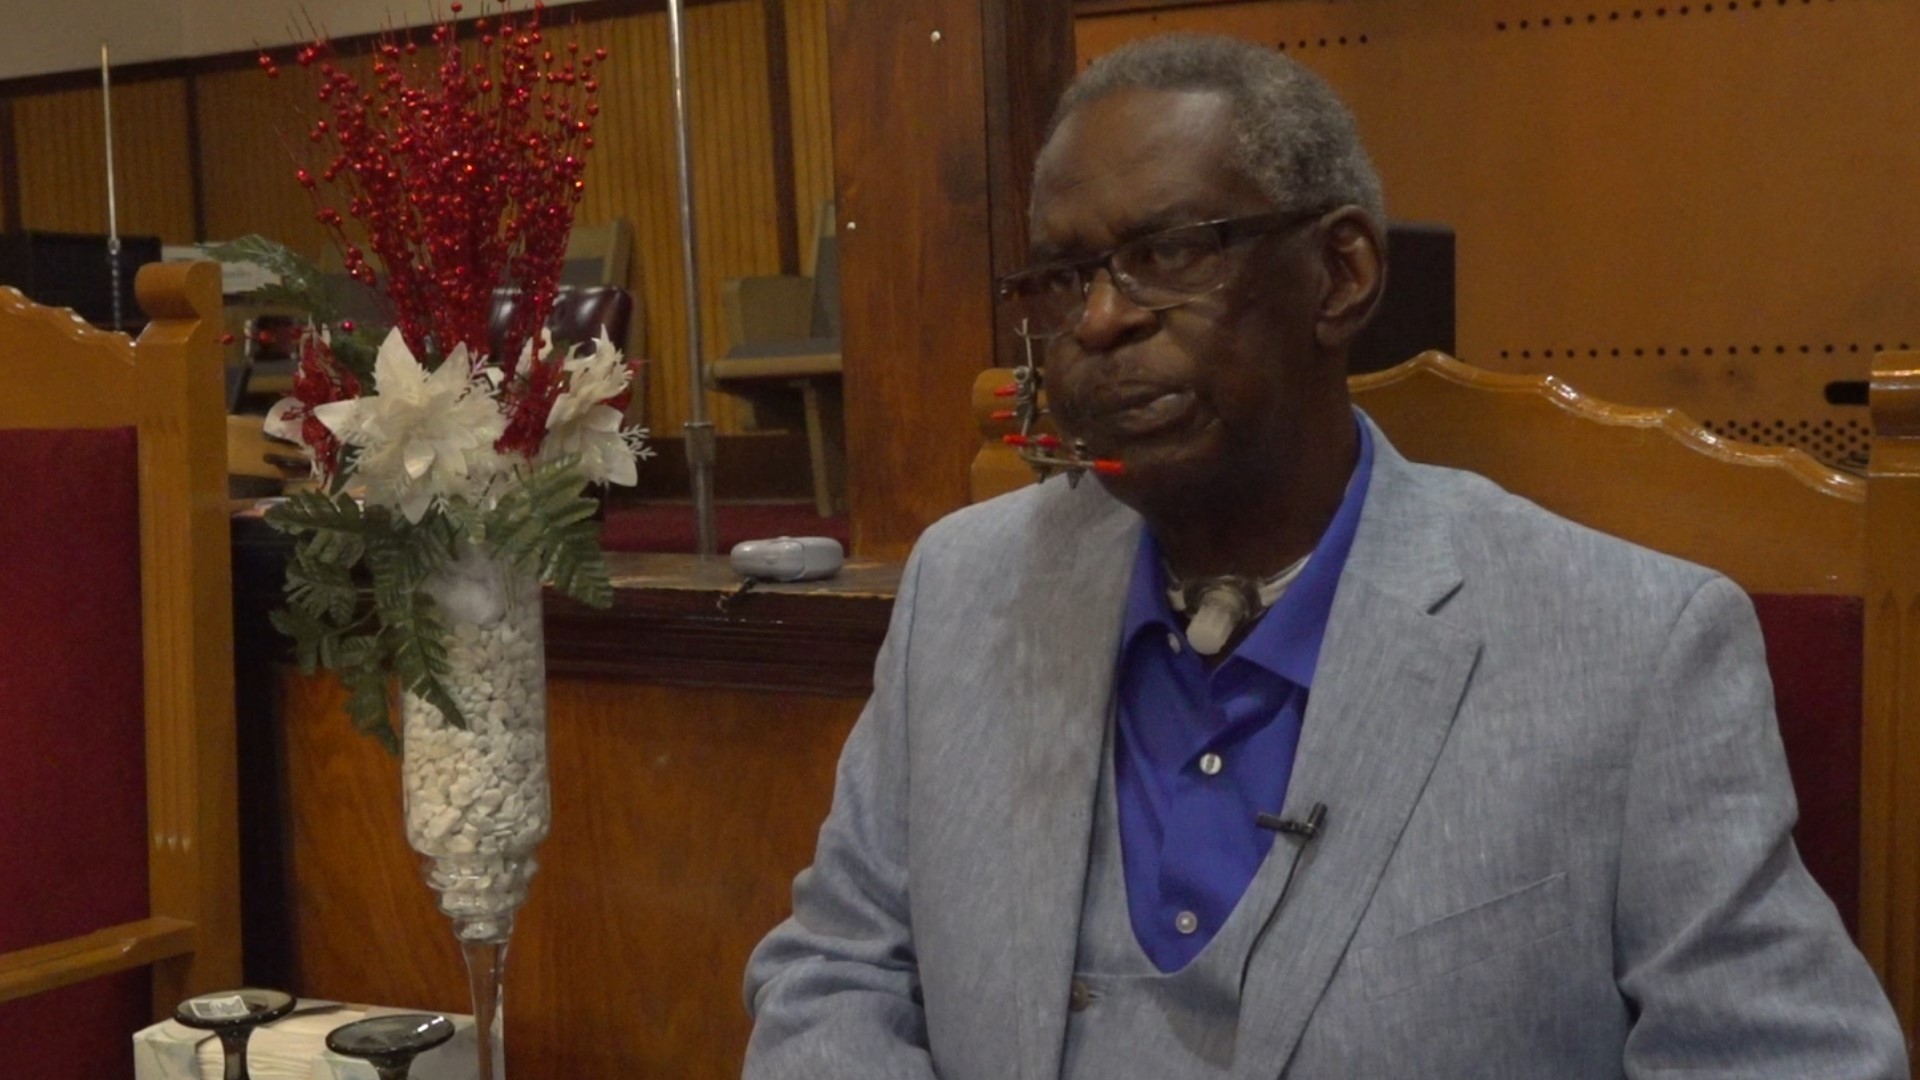 Pastor Clemmie Livingston Jr. was hit in the jaw by a bullet after a carjacking outside the New Zionfield Baptist Church in South Memphis on Feb. 25, 2024.